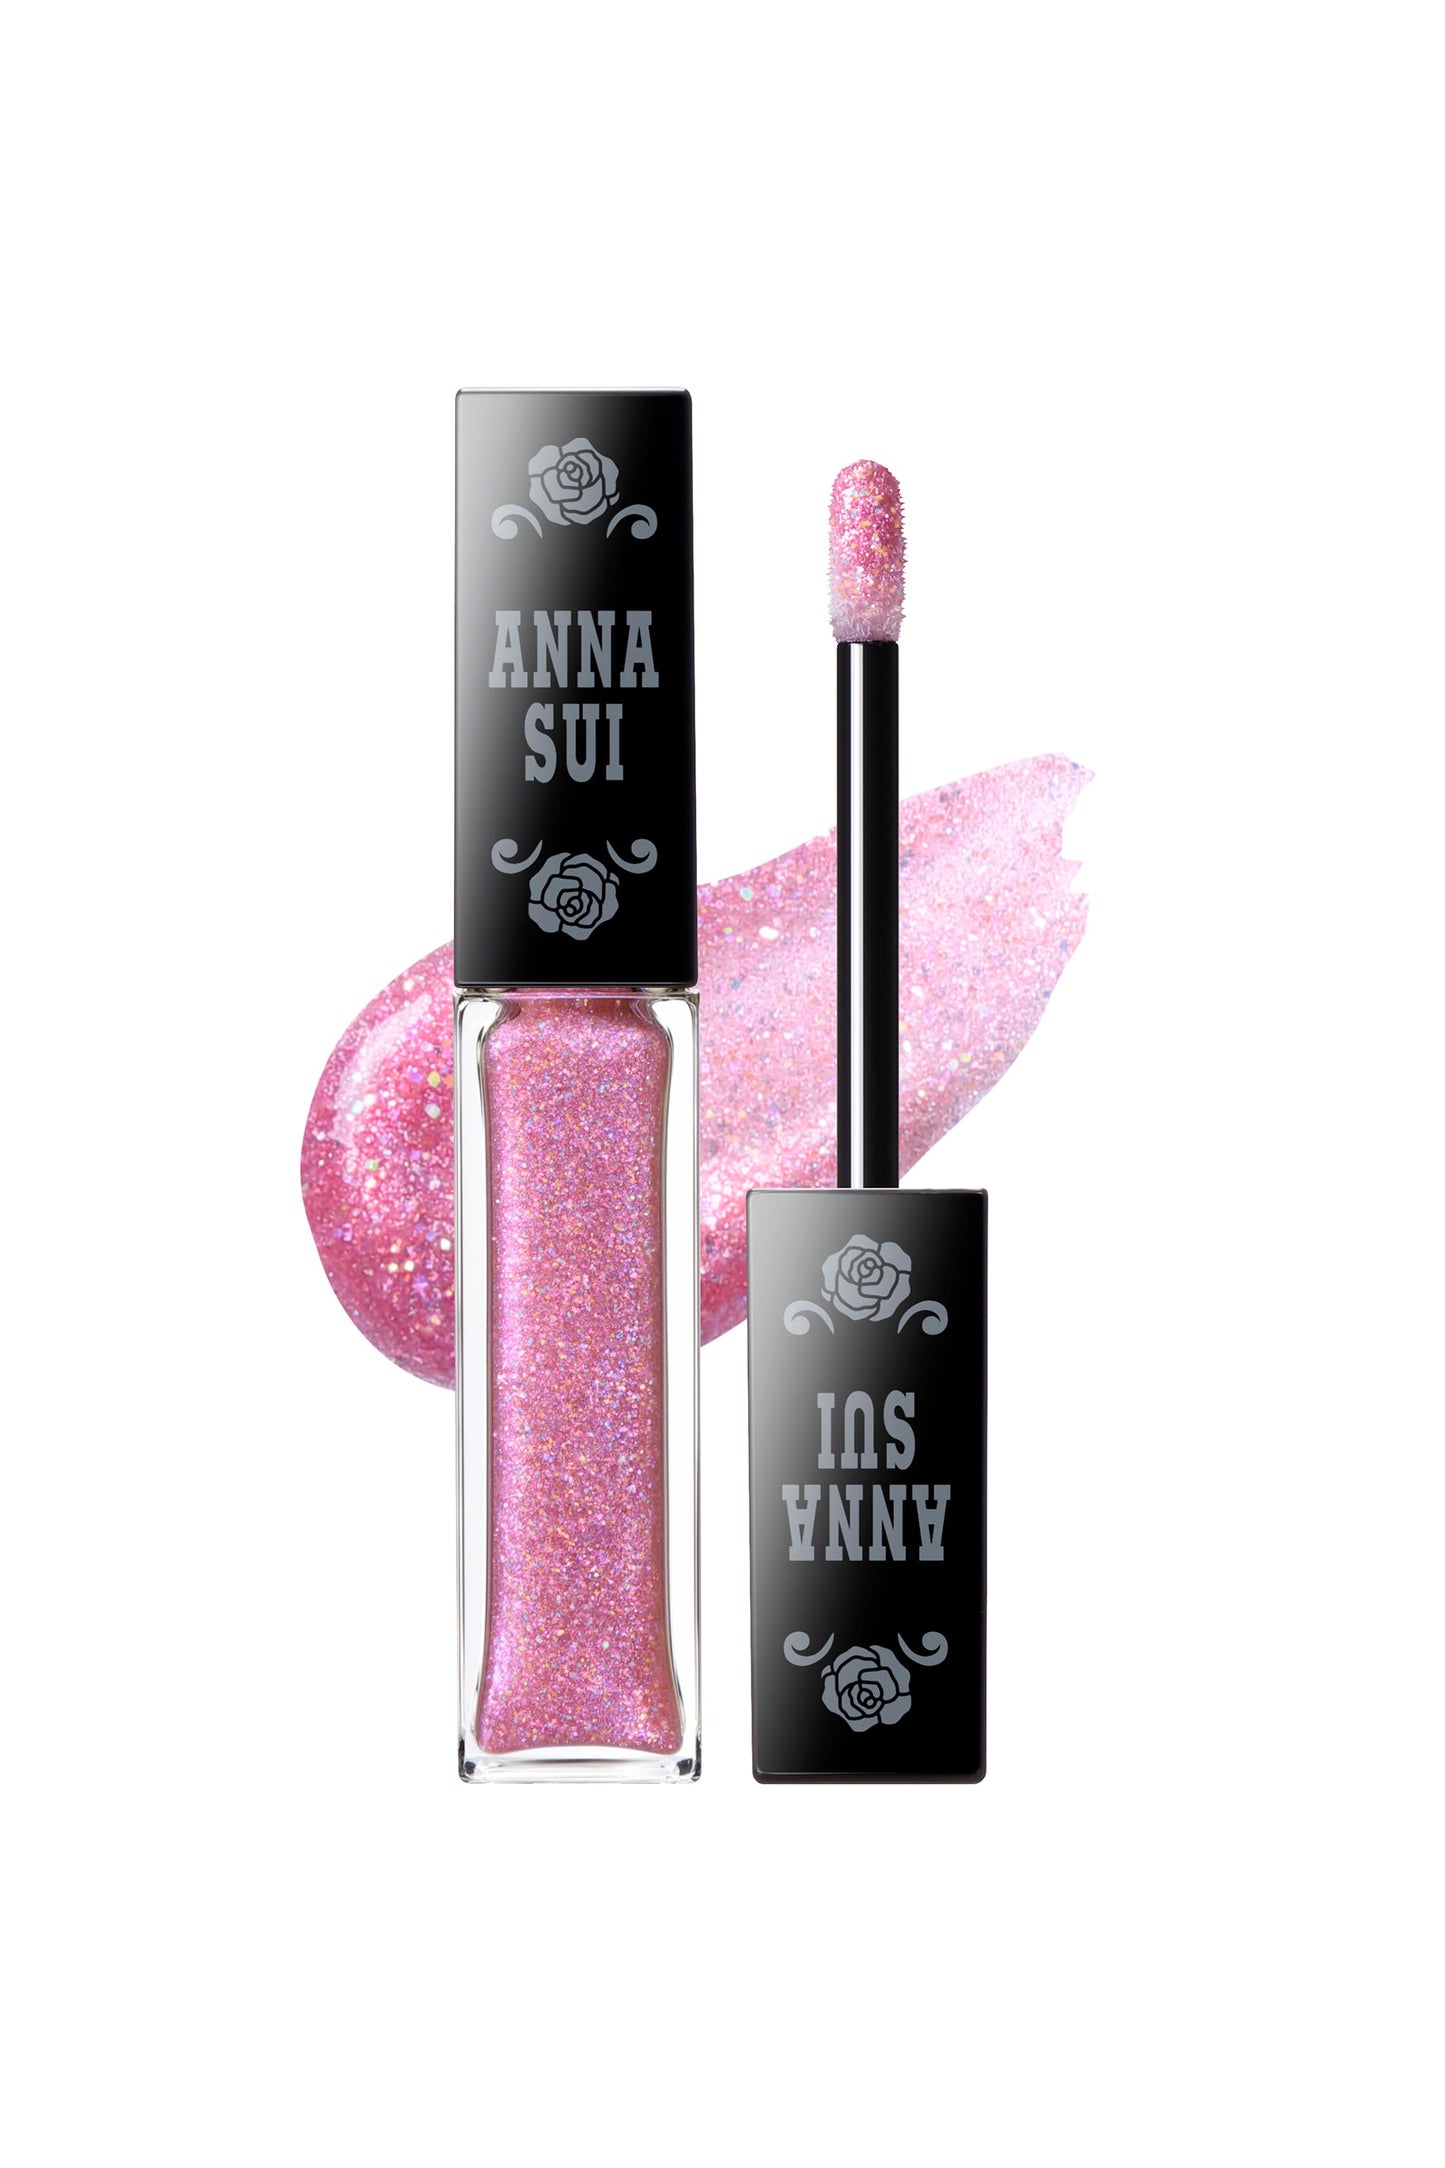 PINK PARADE, transparent bottle & applicator with Anna Sui label on the black top.